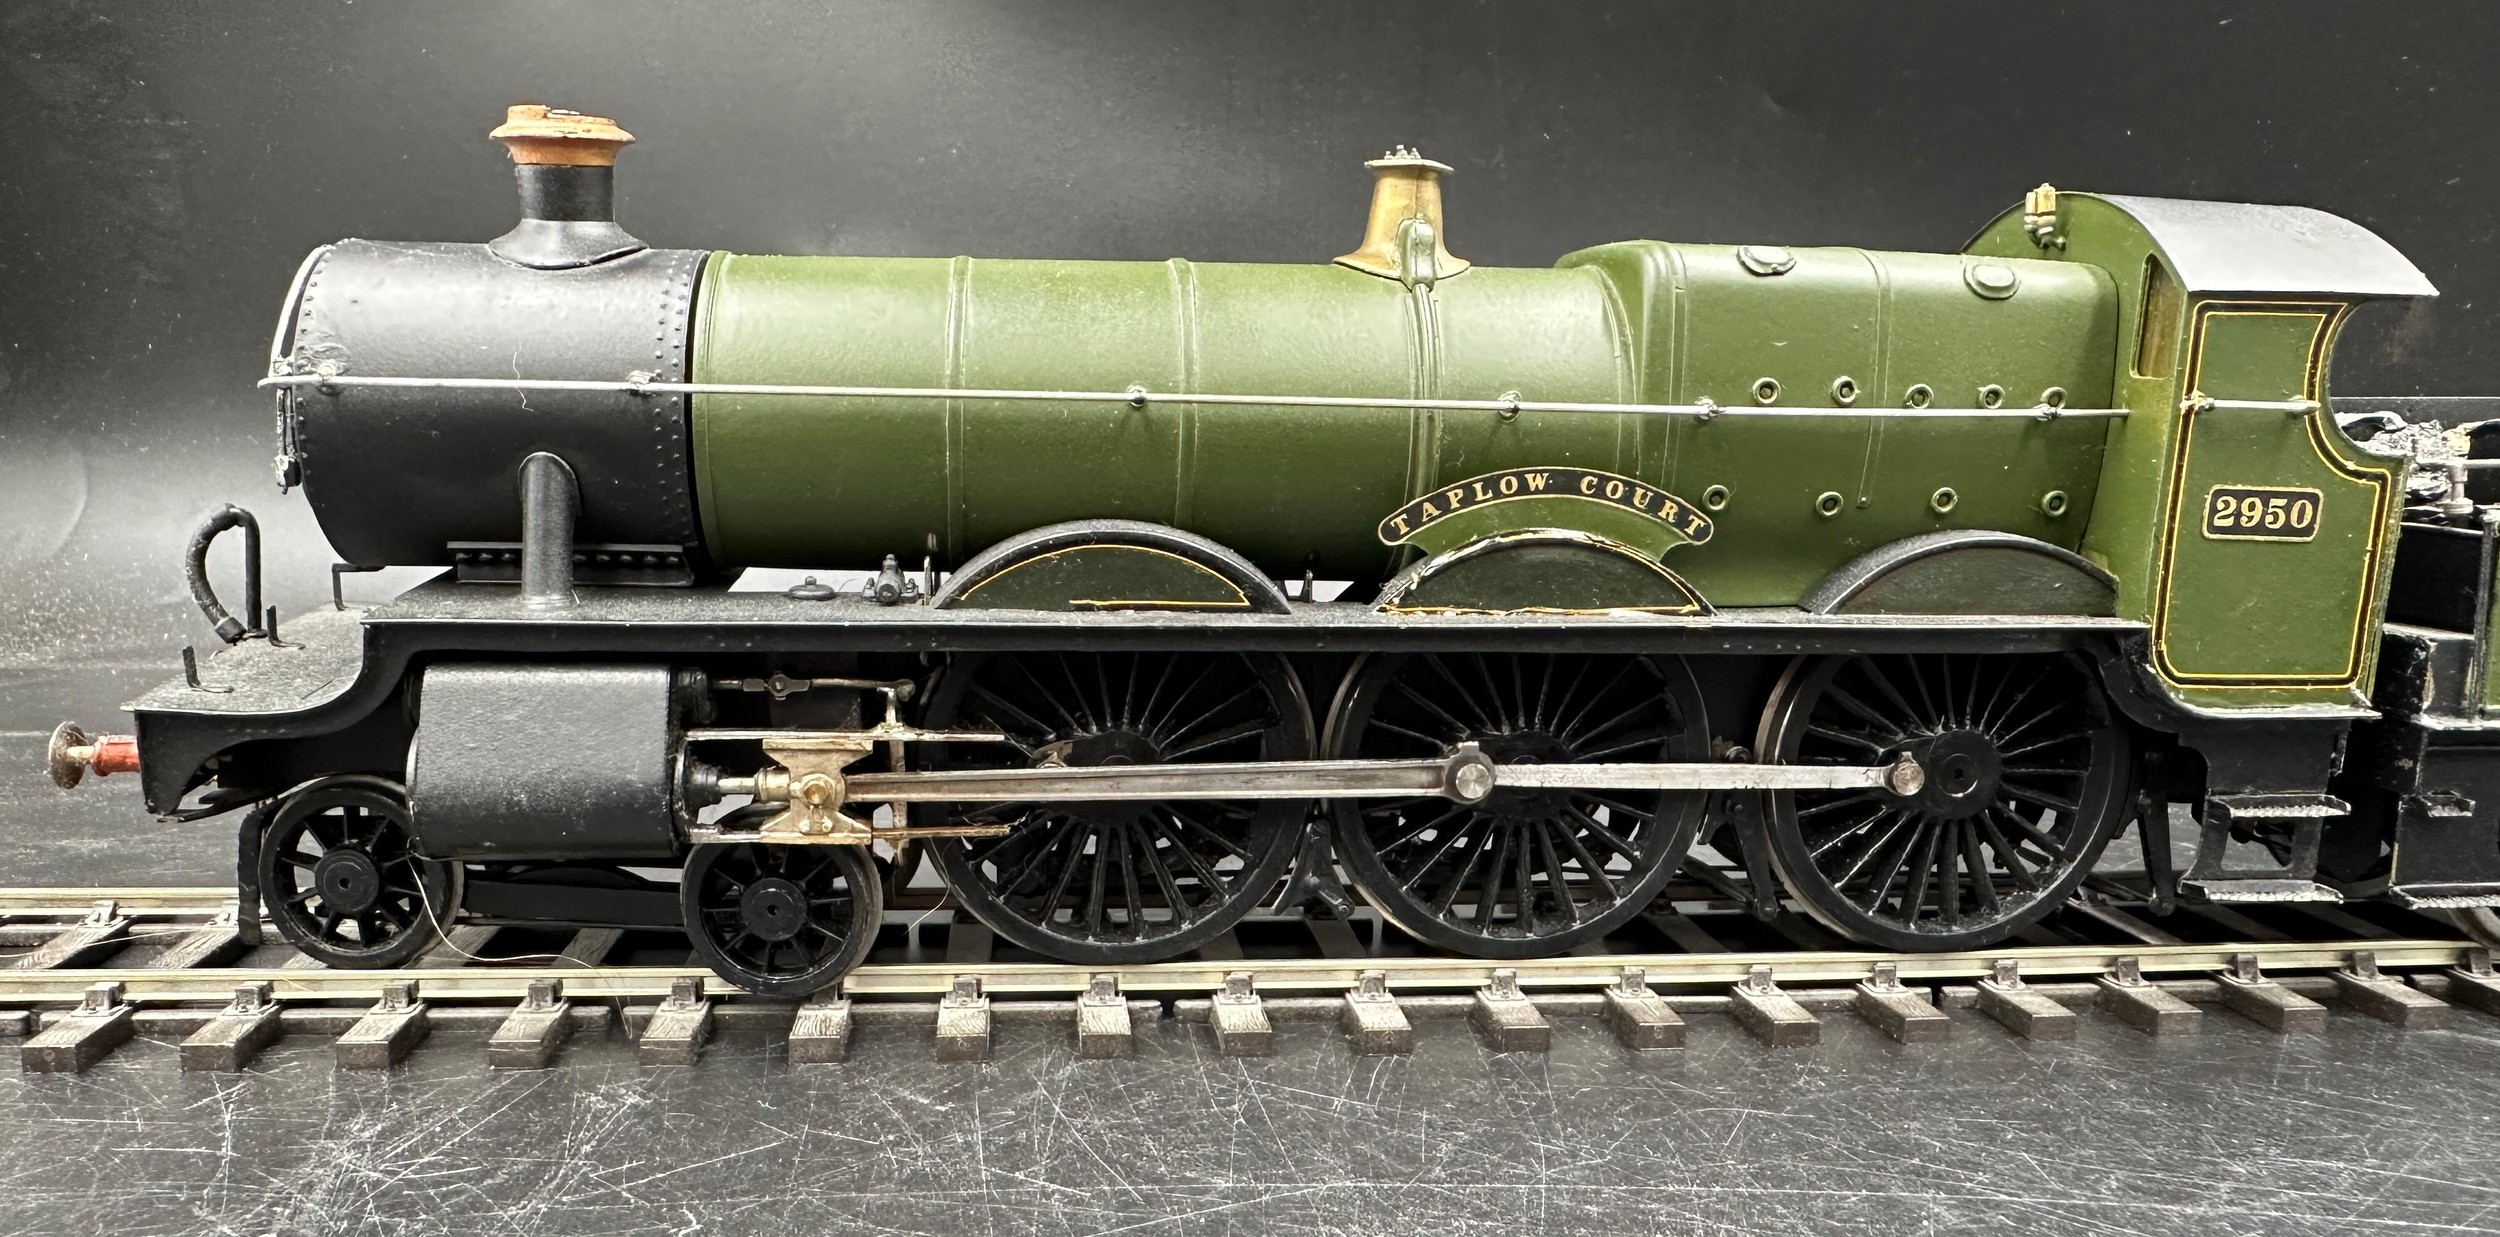 Taplow Court 2950 Great Western 0 gauge in 'Great Western' green with brass name and number plates - Image 3 of 16